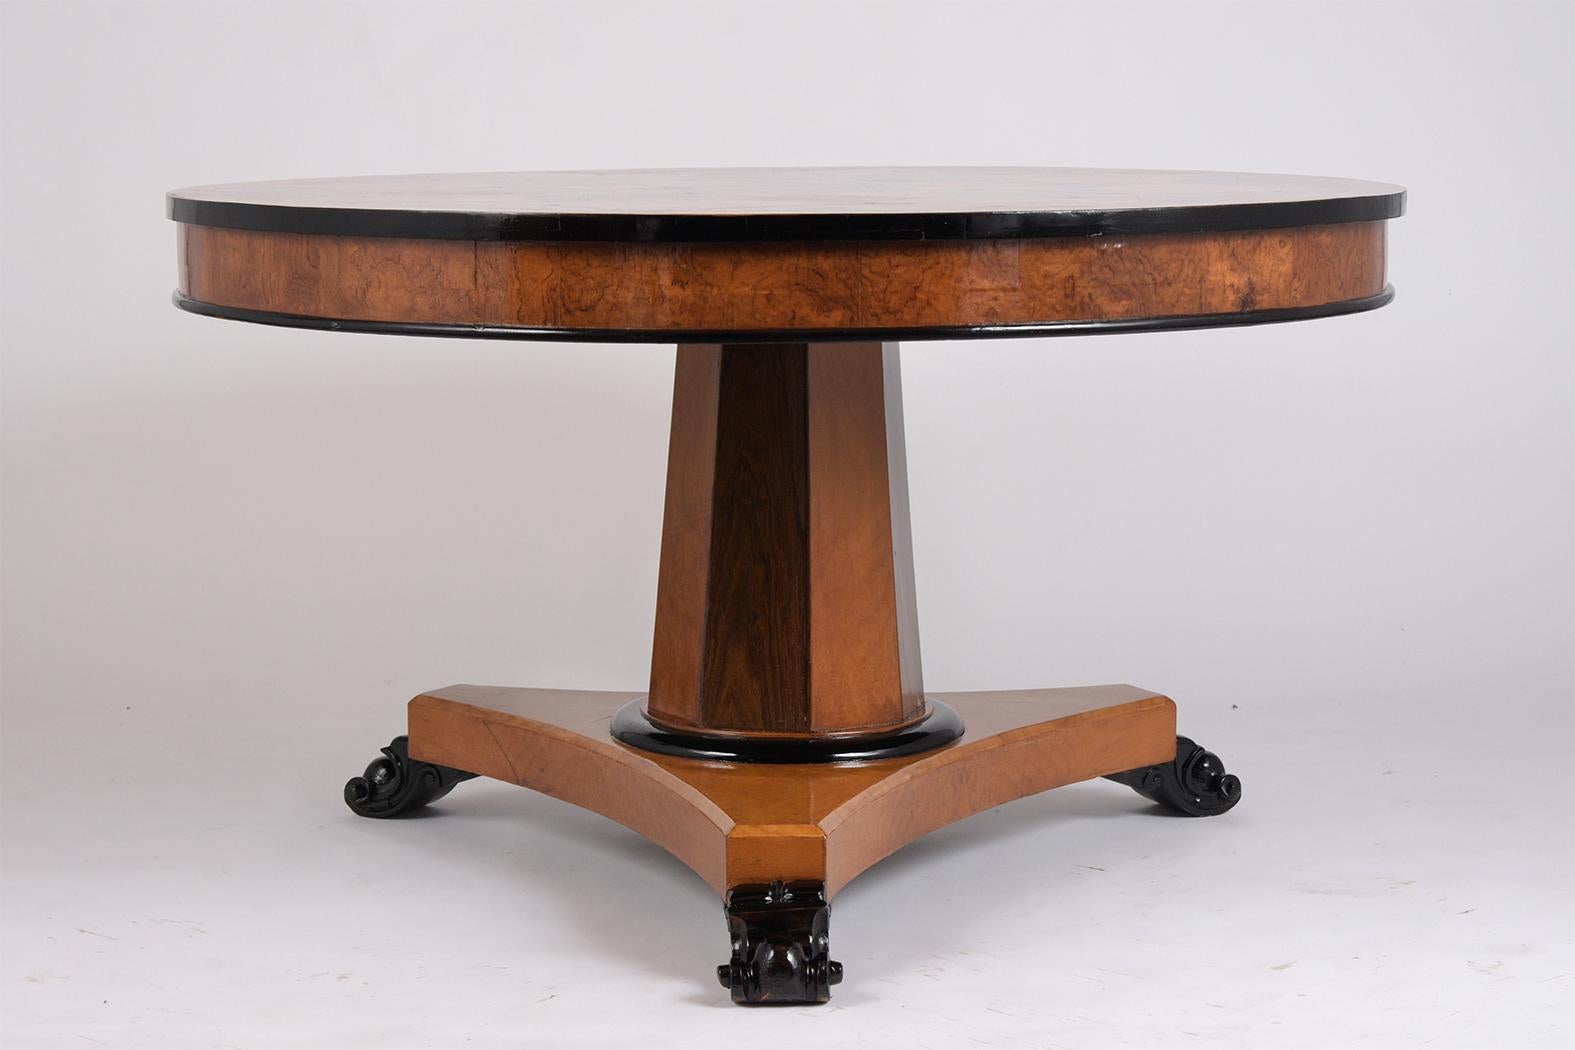 English Inlaid Marquetry Center Table